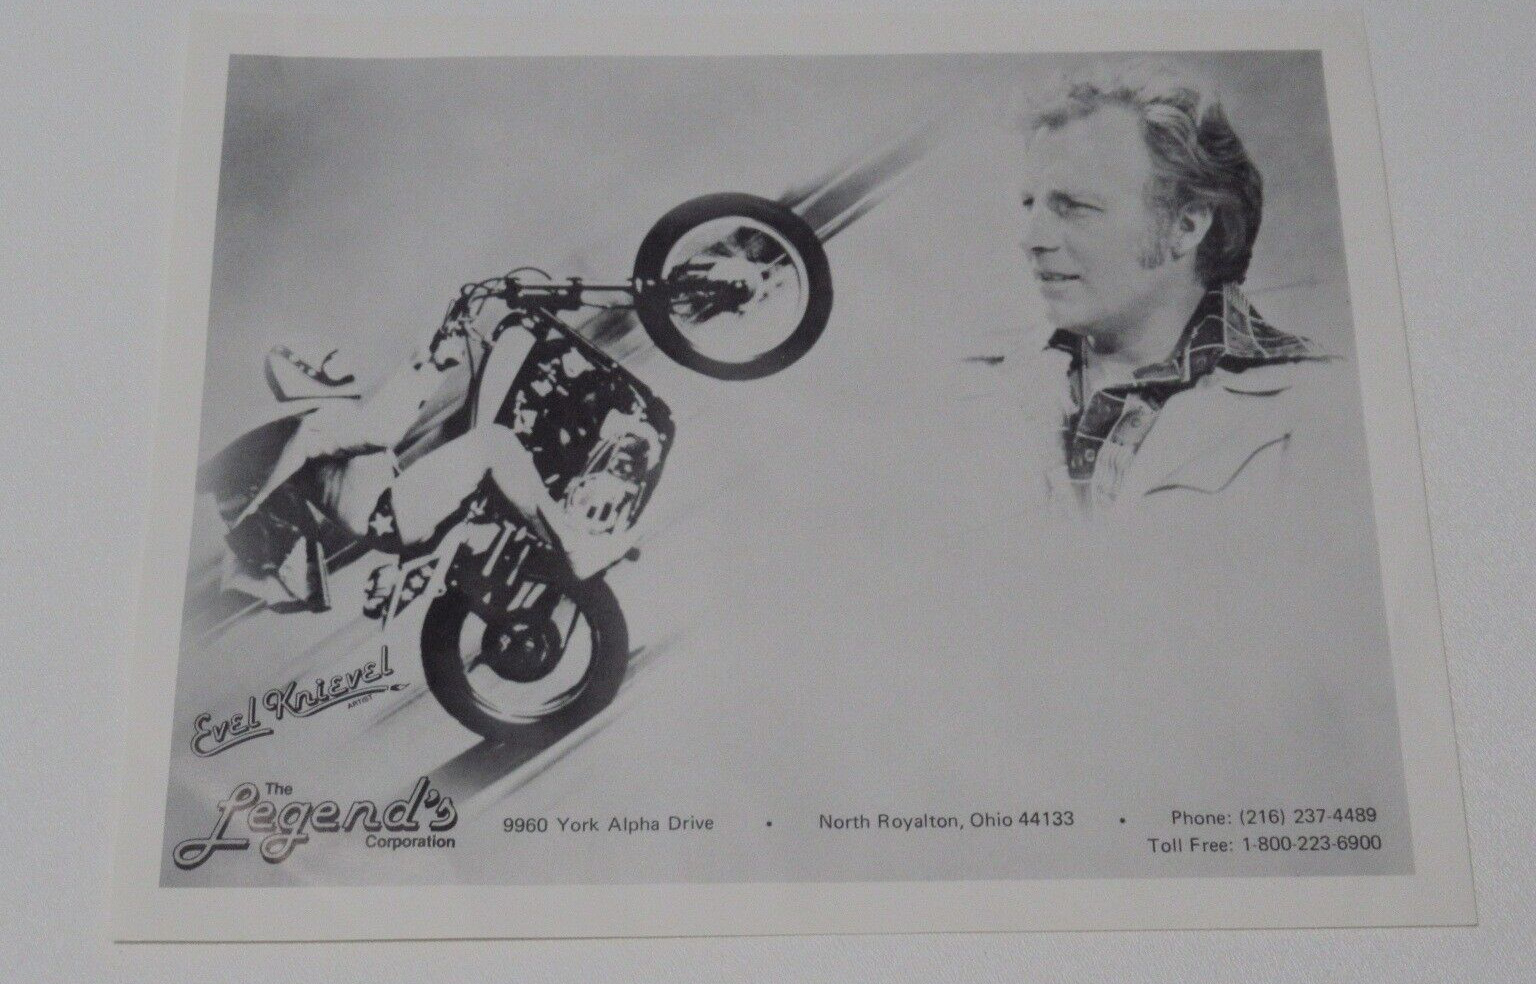 Evil Knievel The Legend\'s Corporation Photo Motorcycle Daredevil